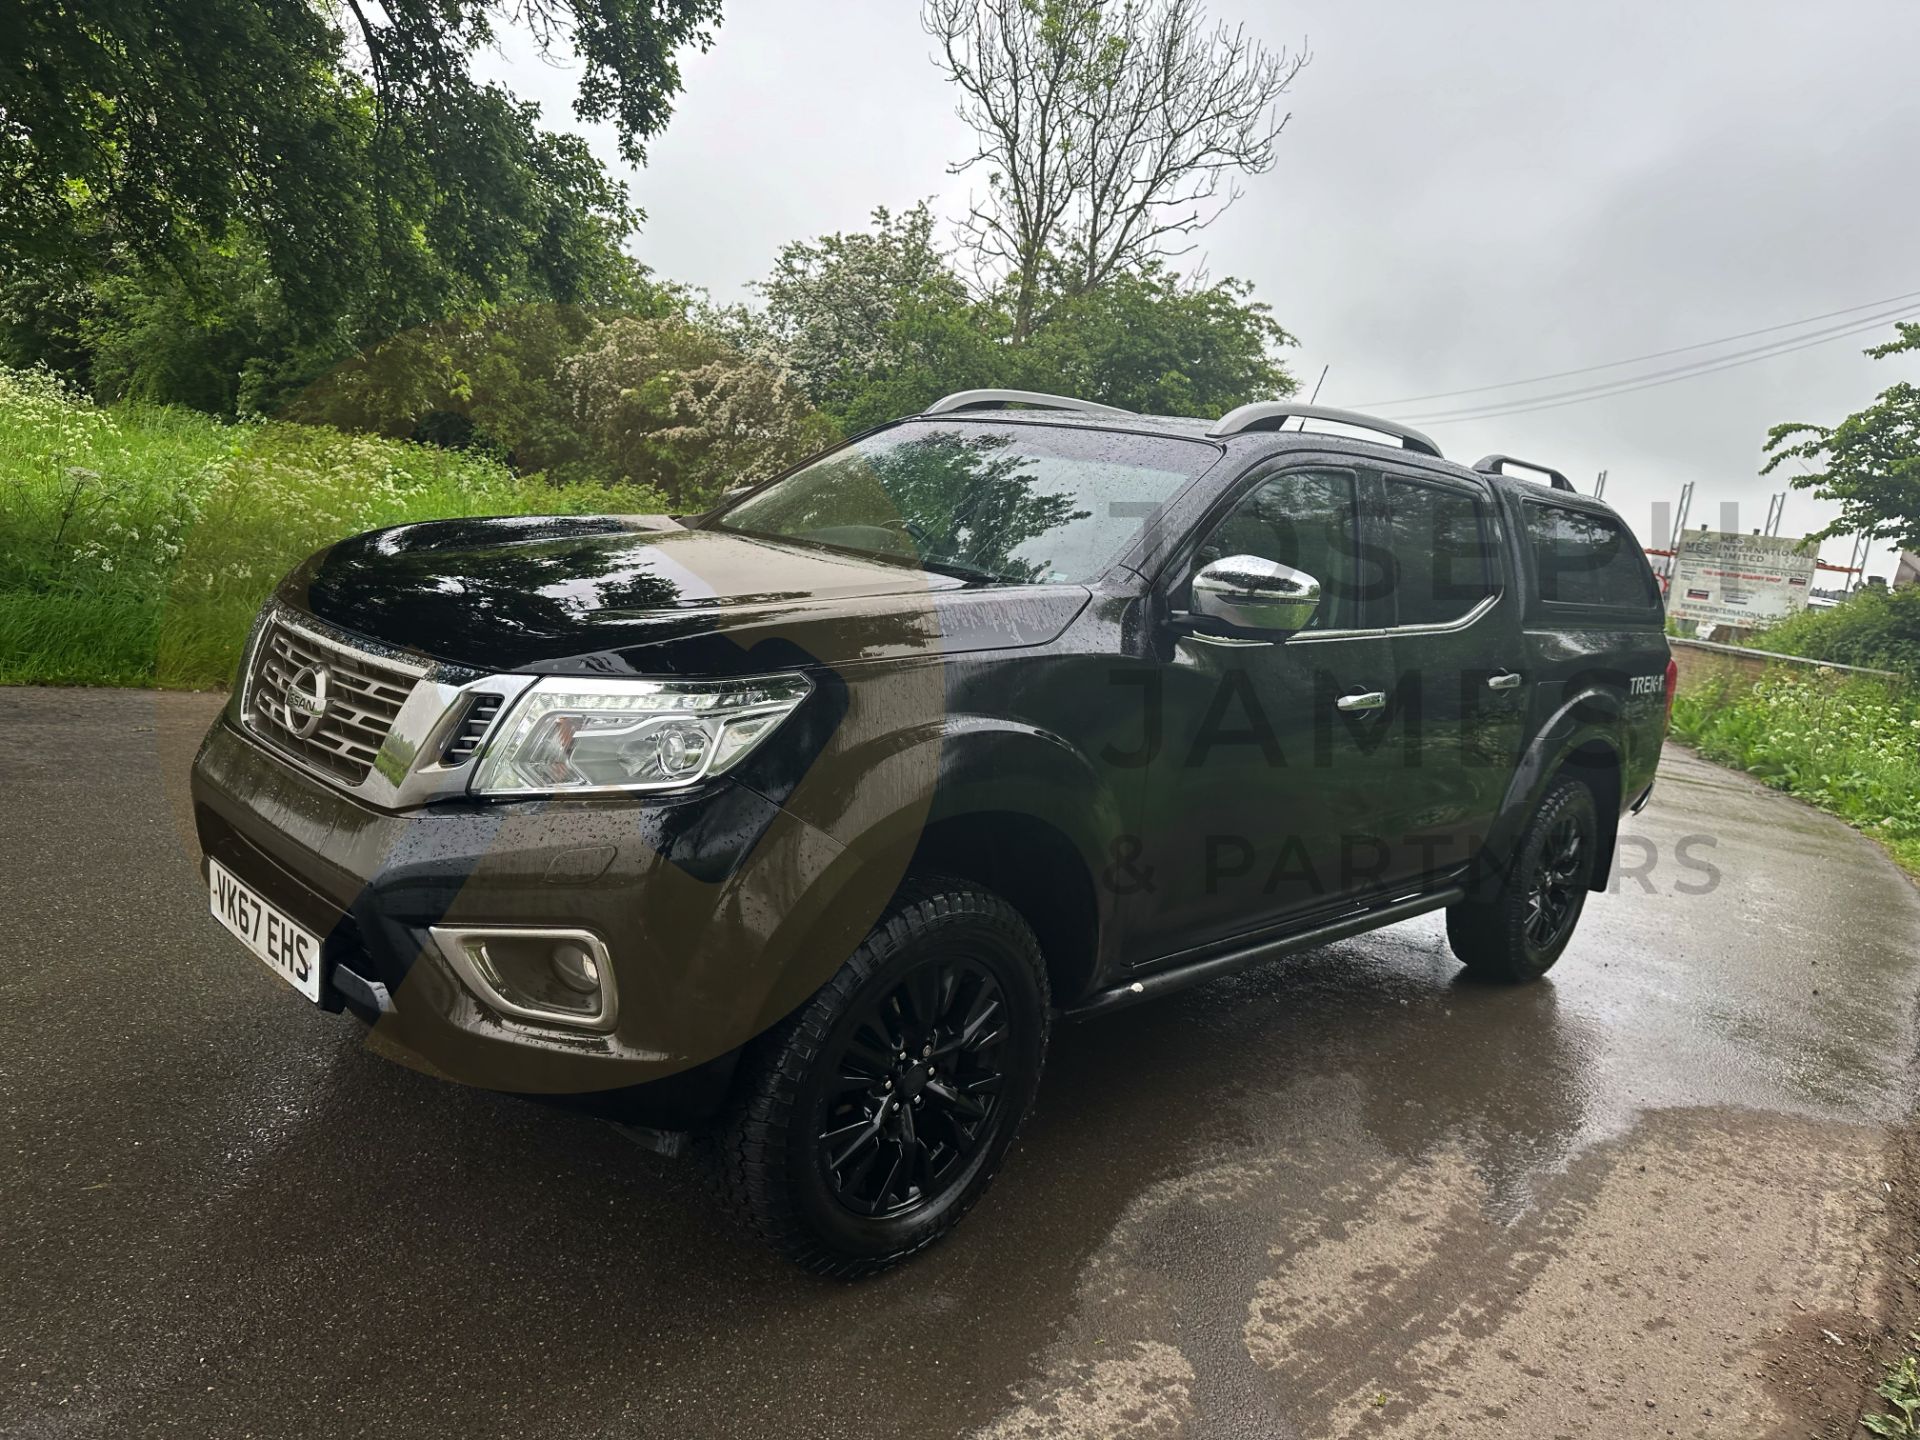 (ON SALE) NISSAN NAVARA *TREK-1 EDITION* DOUBLE CAB PICK-UP (2018 - EURO 6) 2.3 DCI - AUTOMATIC - Image 6 of 52